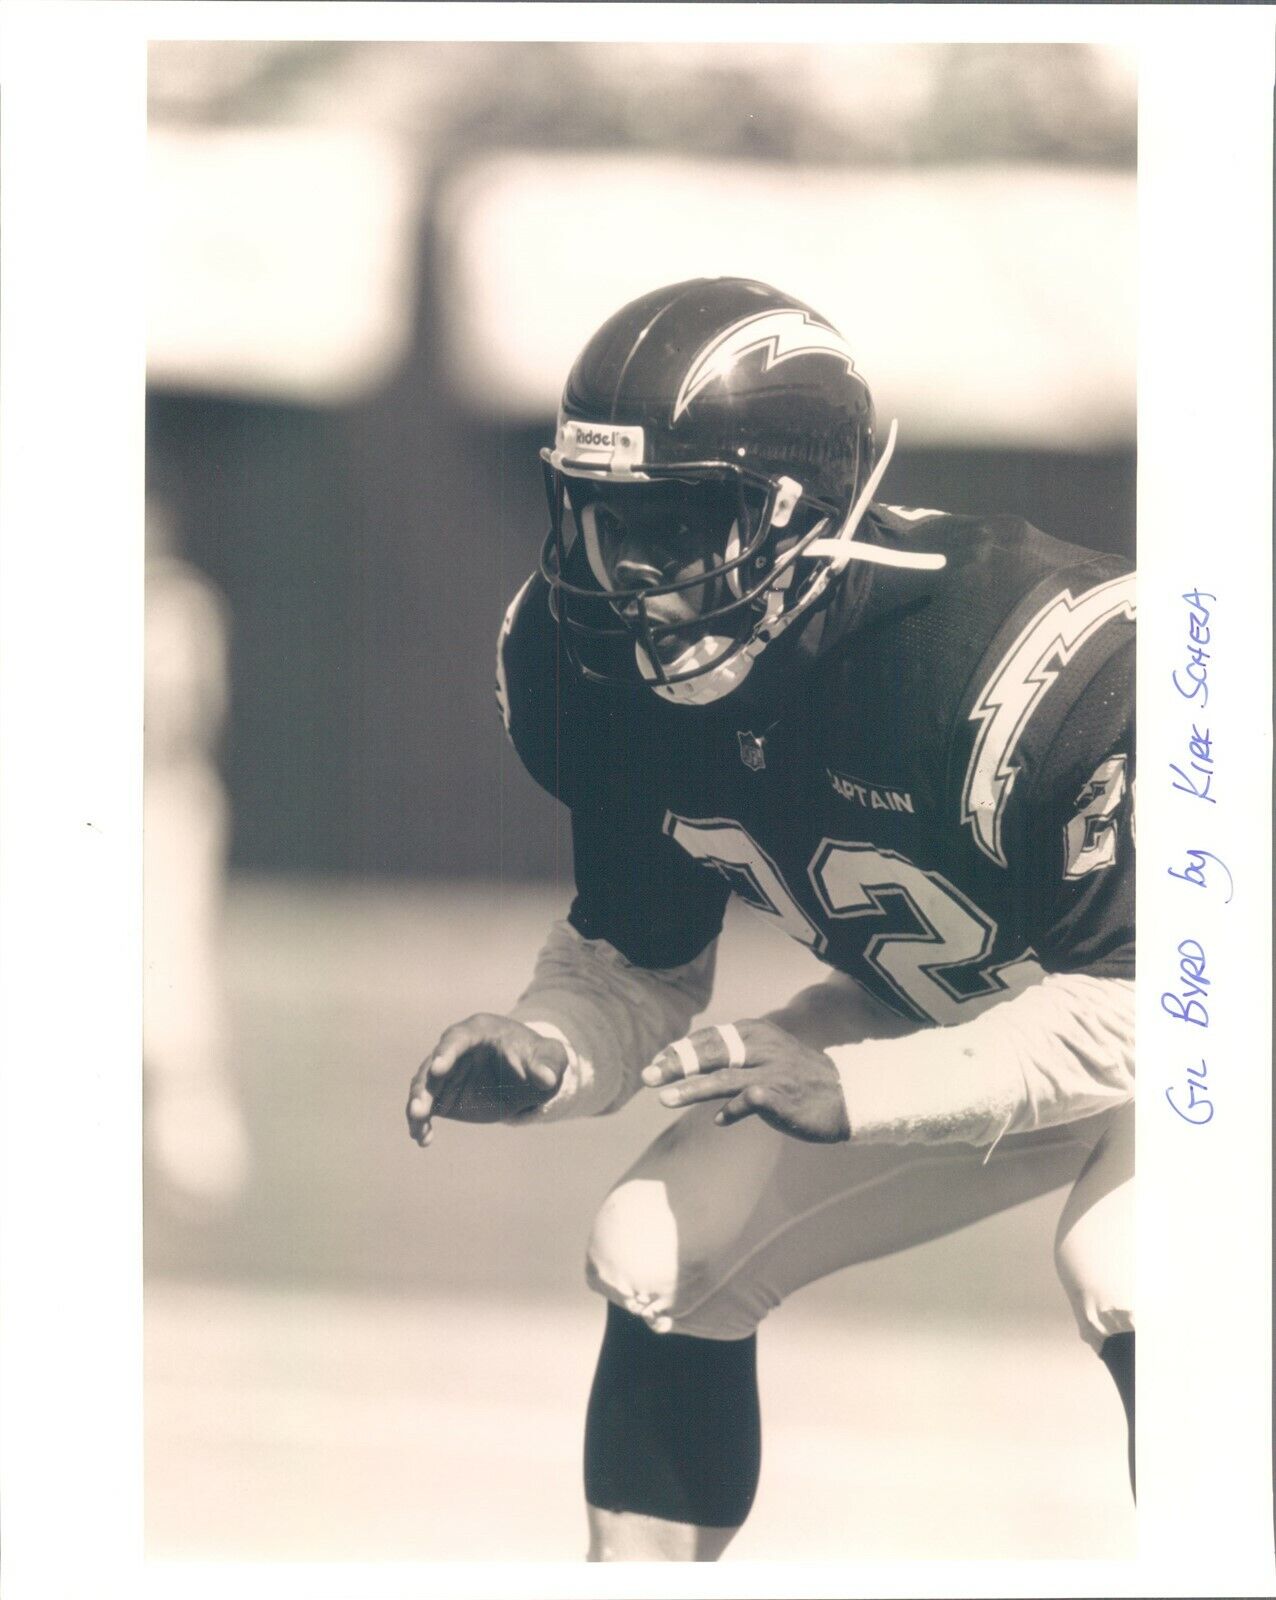 LG895 1992 Orig Kirk Scheza Photo GIL BYRD San Diego Chargers All-Pro Def Back